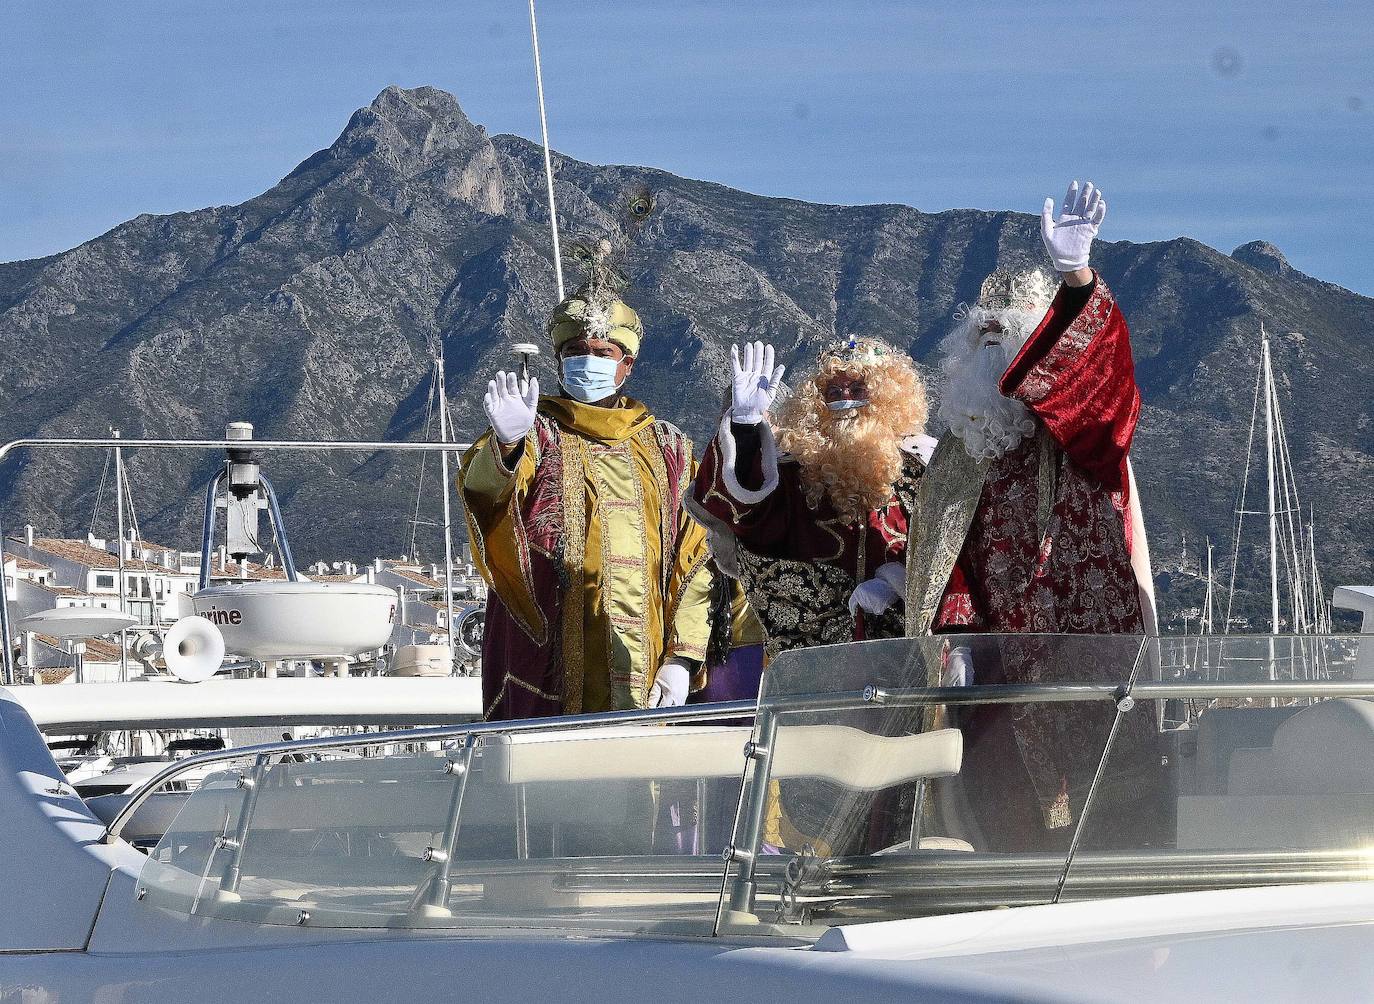 The Three Kings arrived by boat in Marbella last year./JOSELE